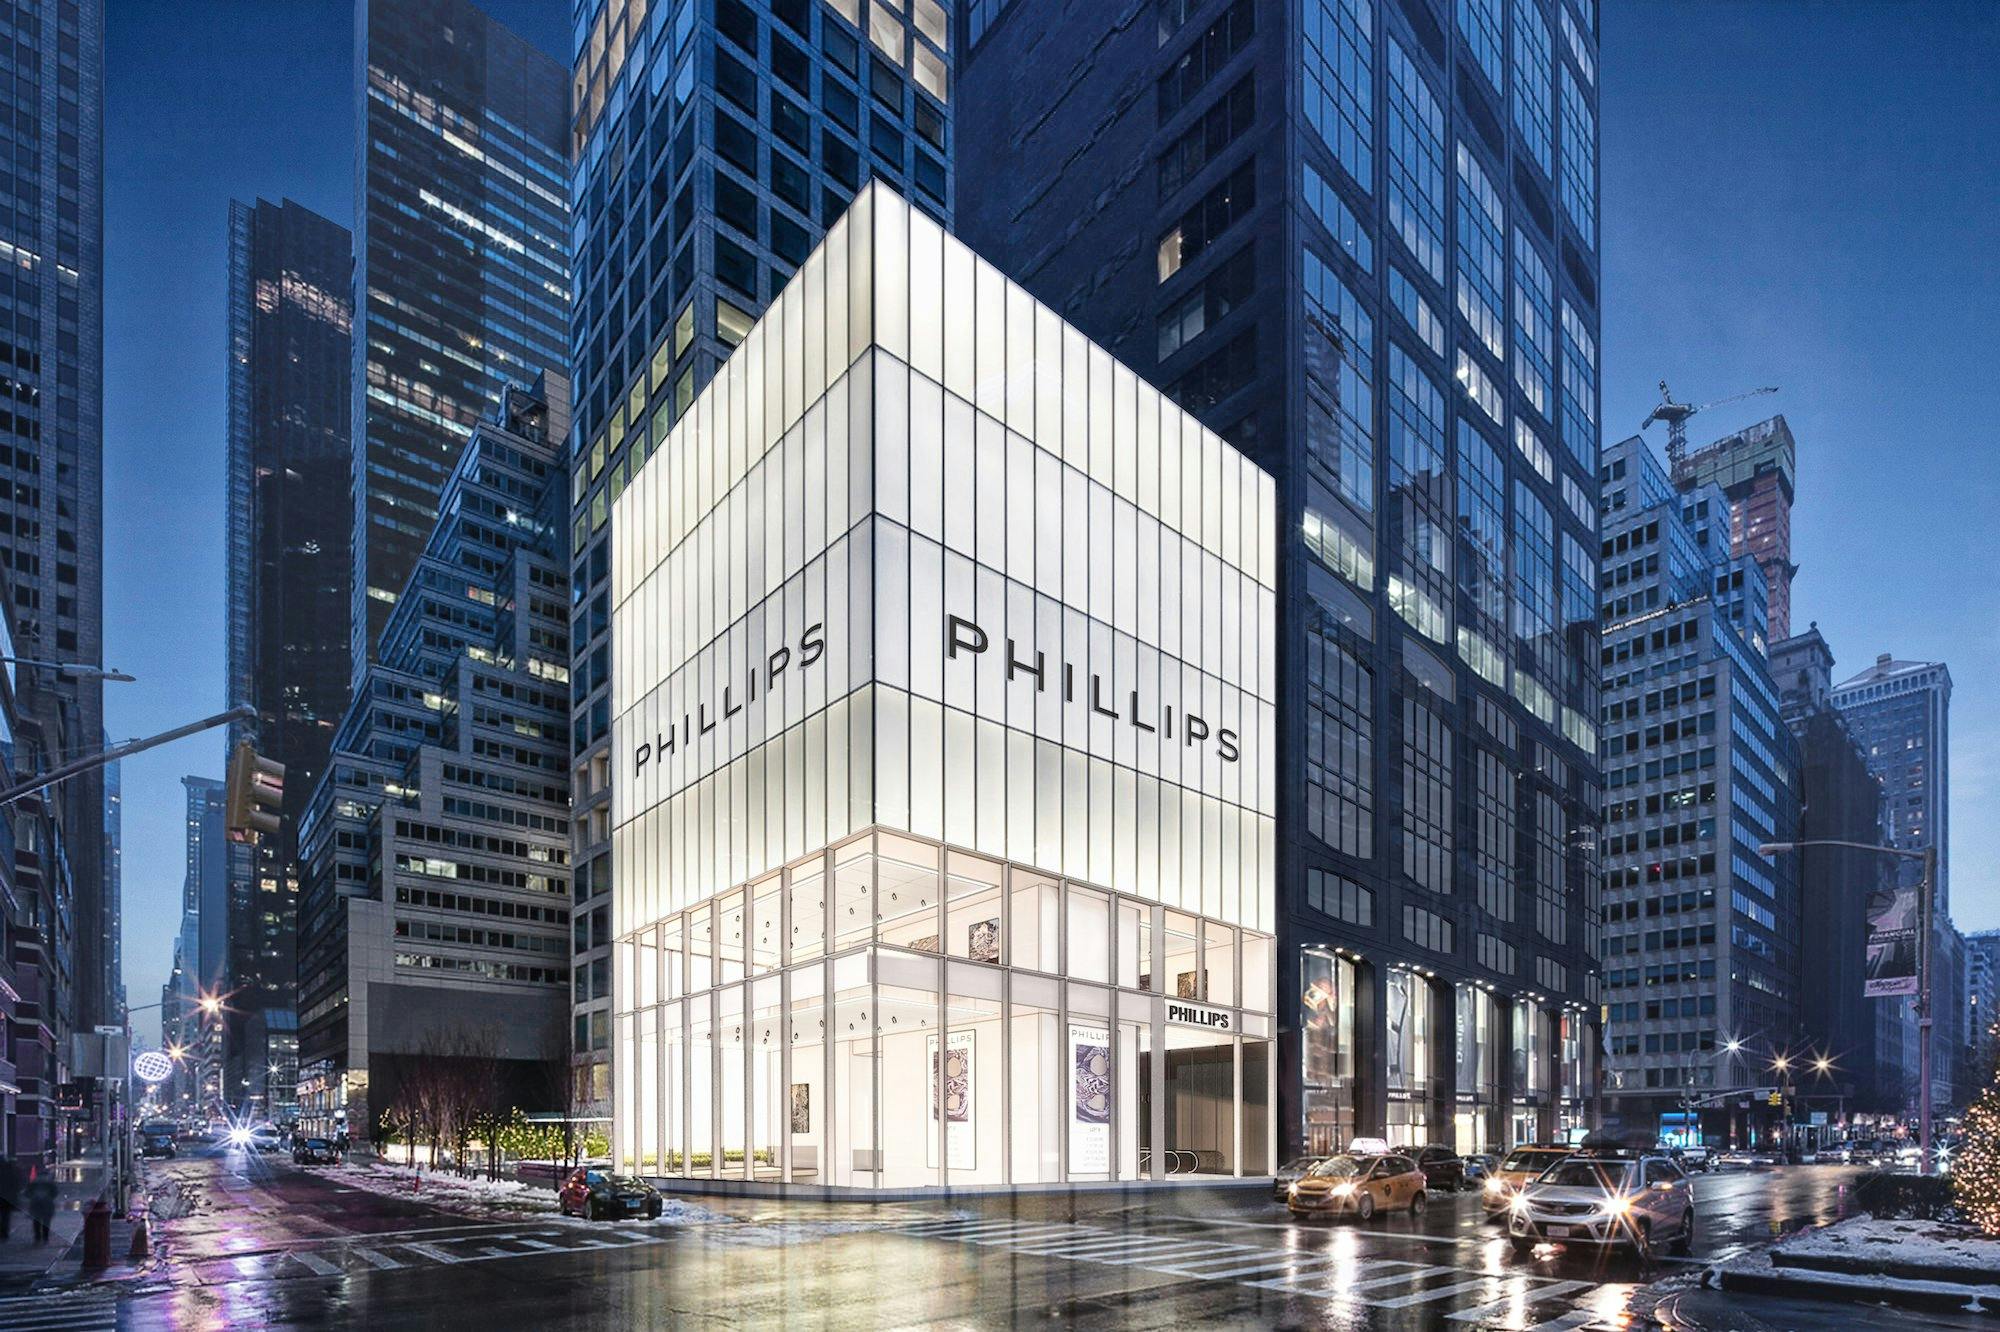 A photo of the outside of Phillips Headquarters.